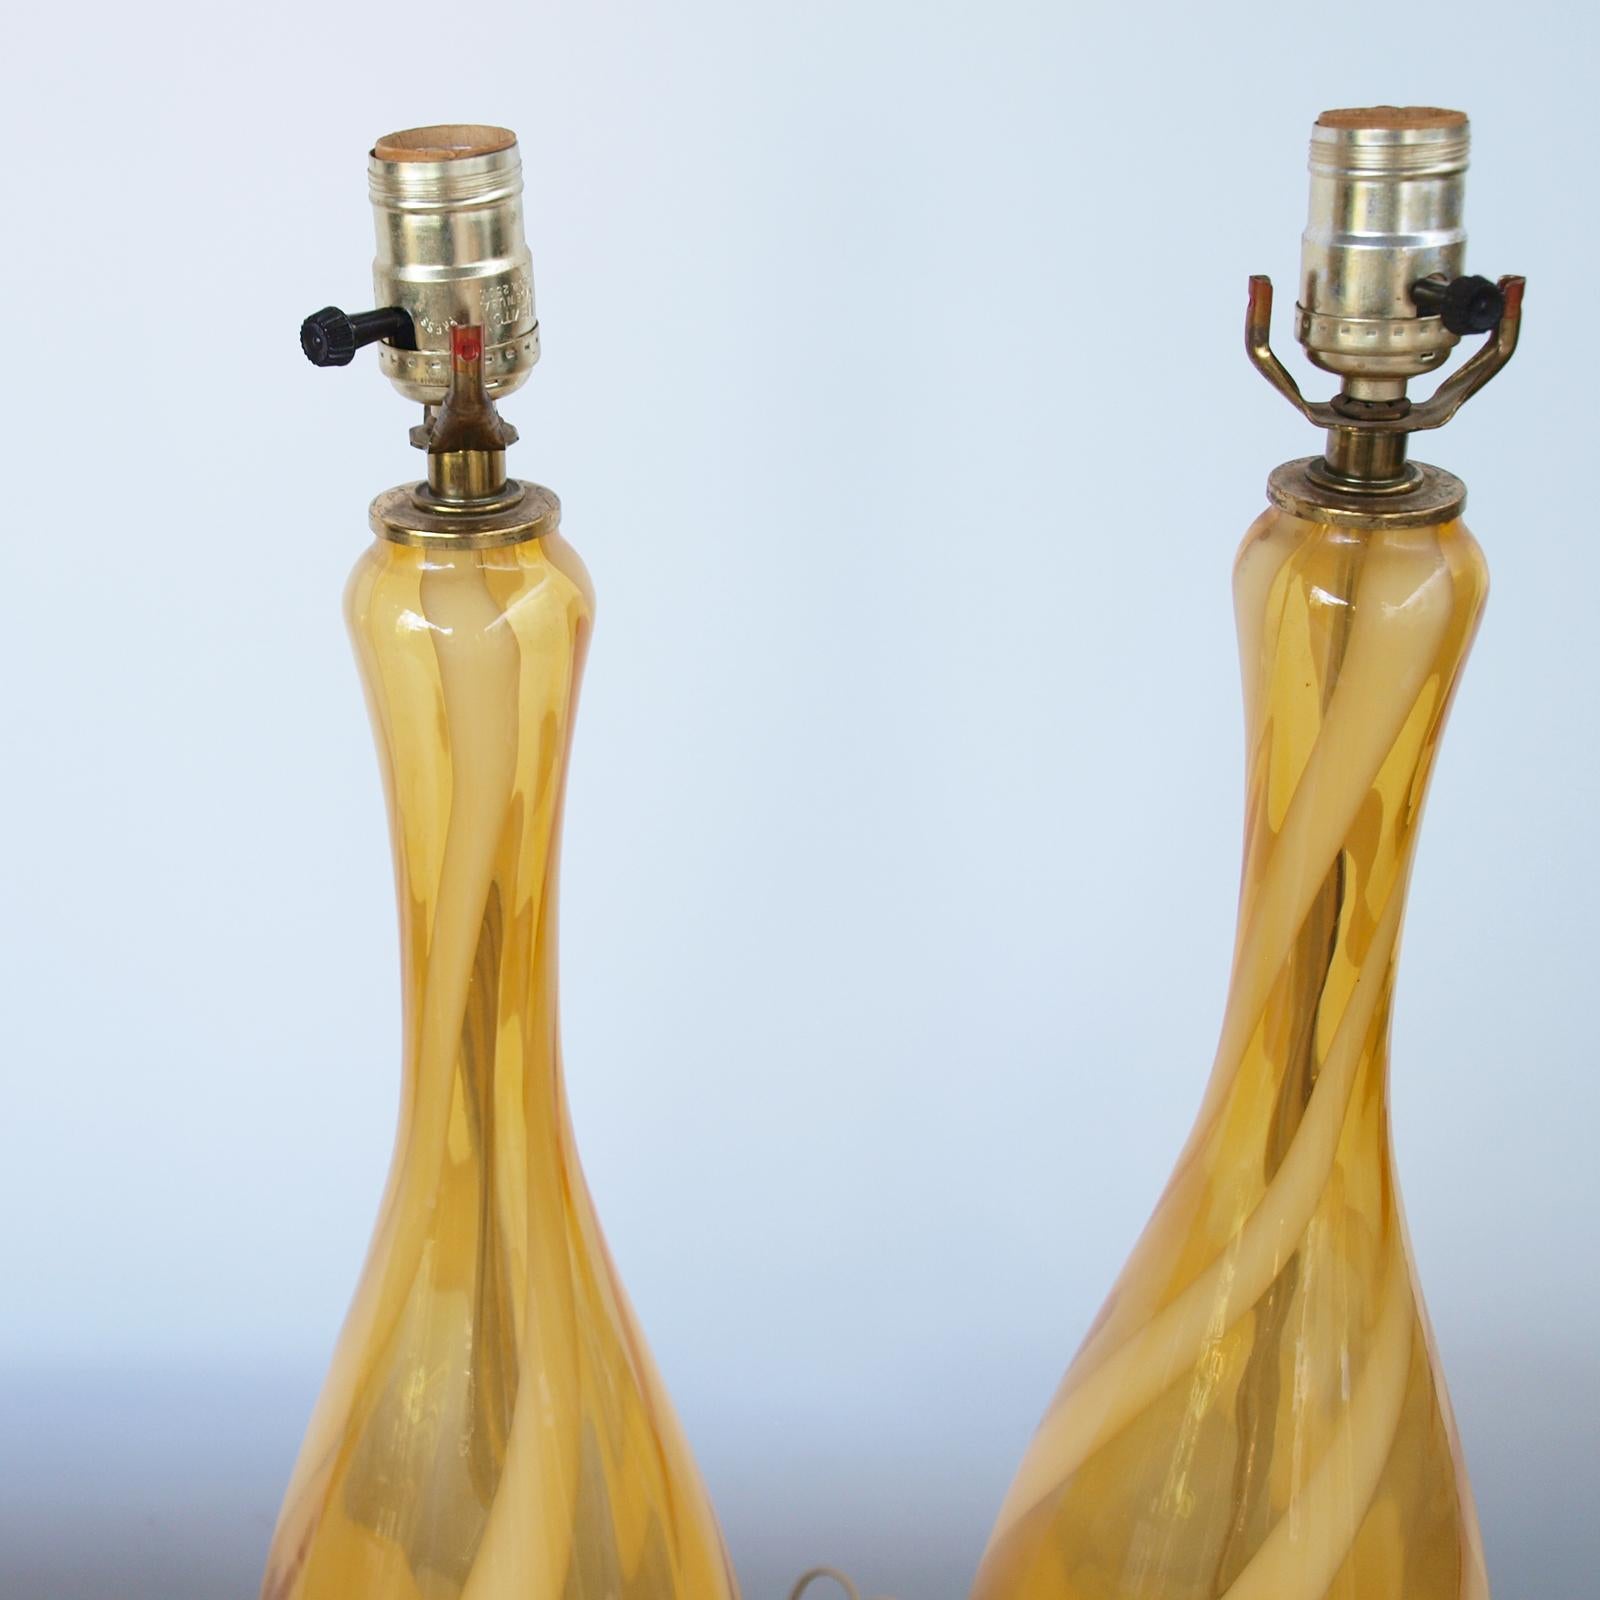 Pair of lamps, of handblown glass marked with an 